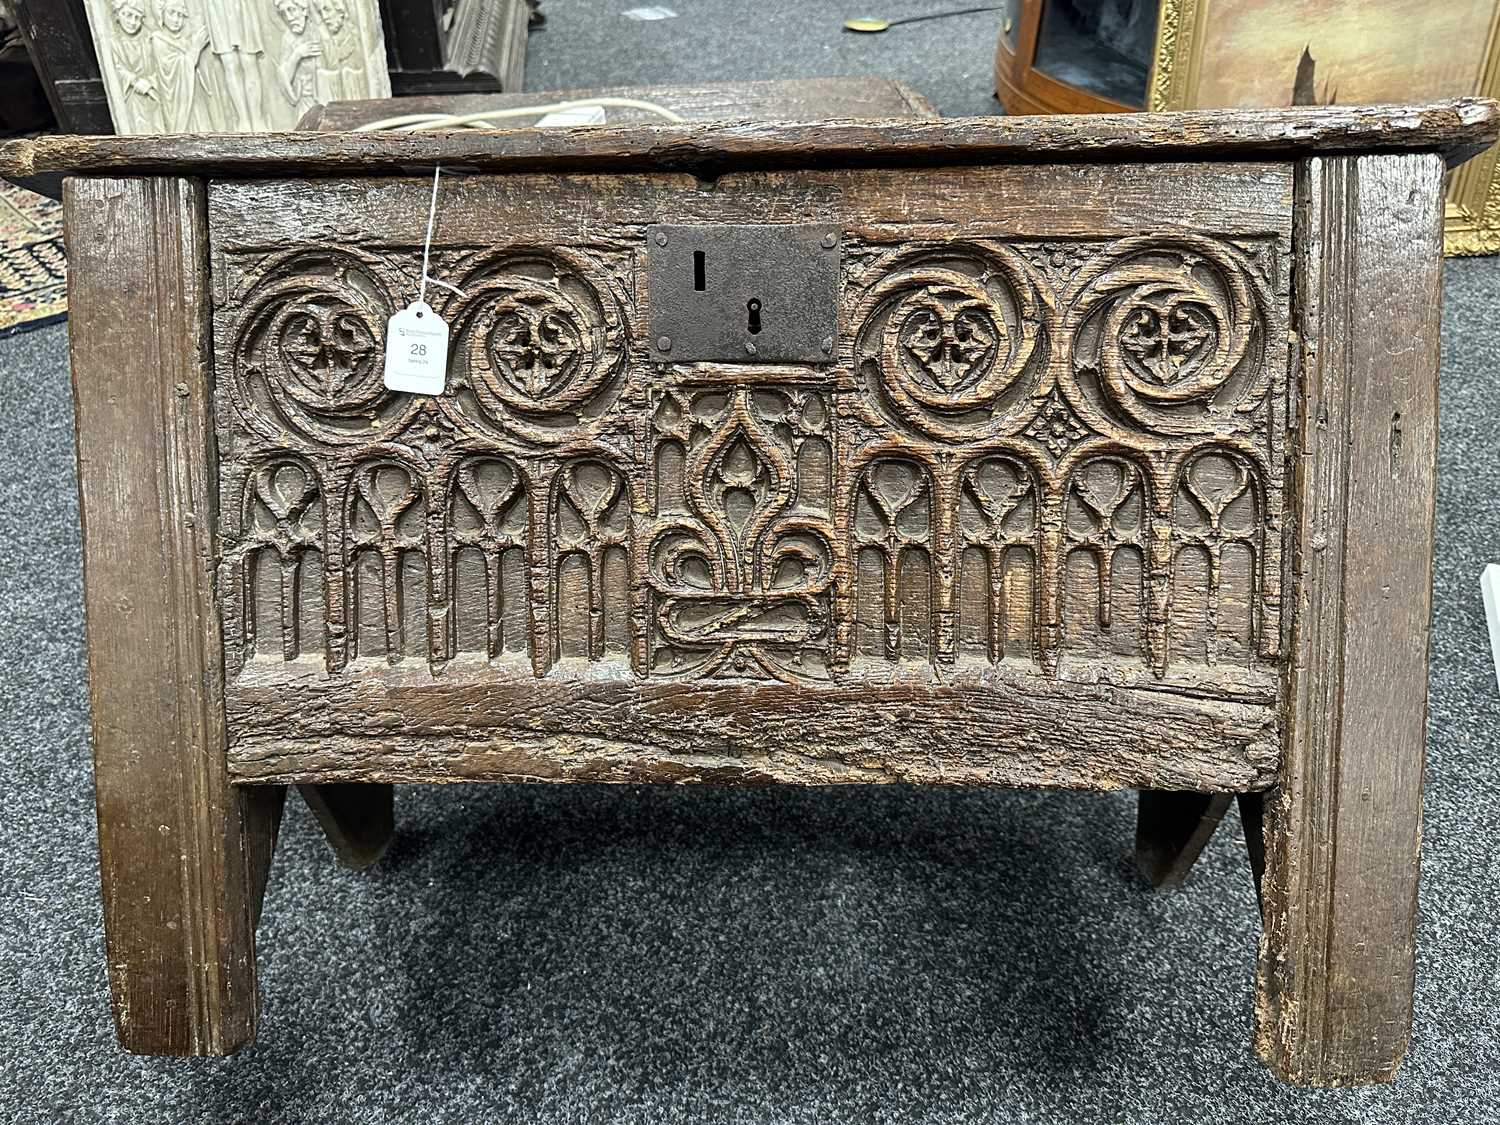 A RARE 15TH/16TH CENTURY GOTHIC OAK PLANK COFFER OF SMALL SIZE - Image 16 of 22